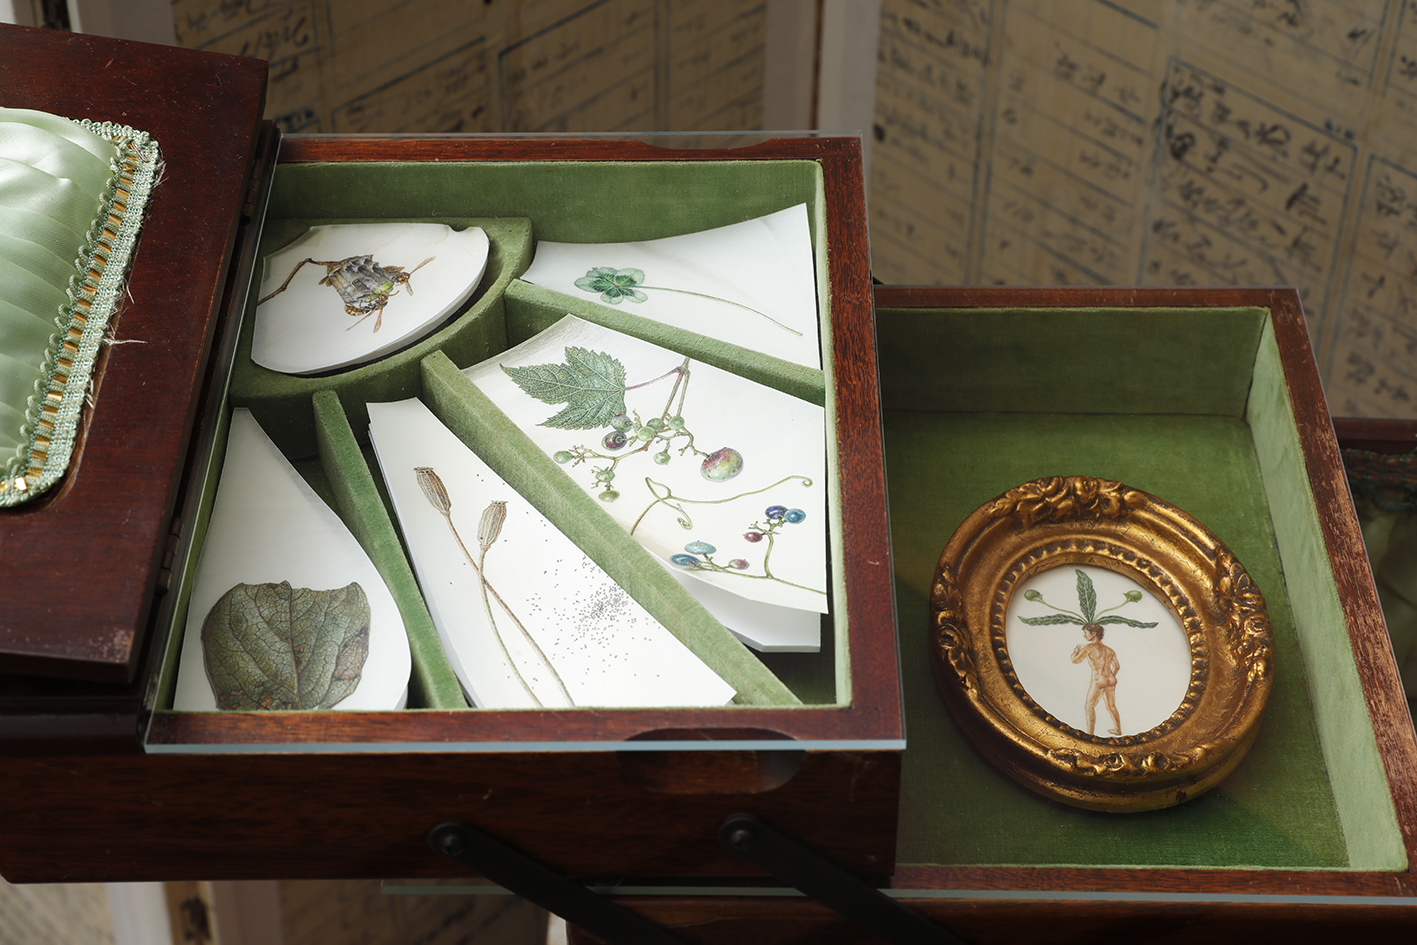 A sawing box of curiosities